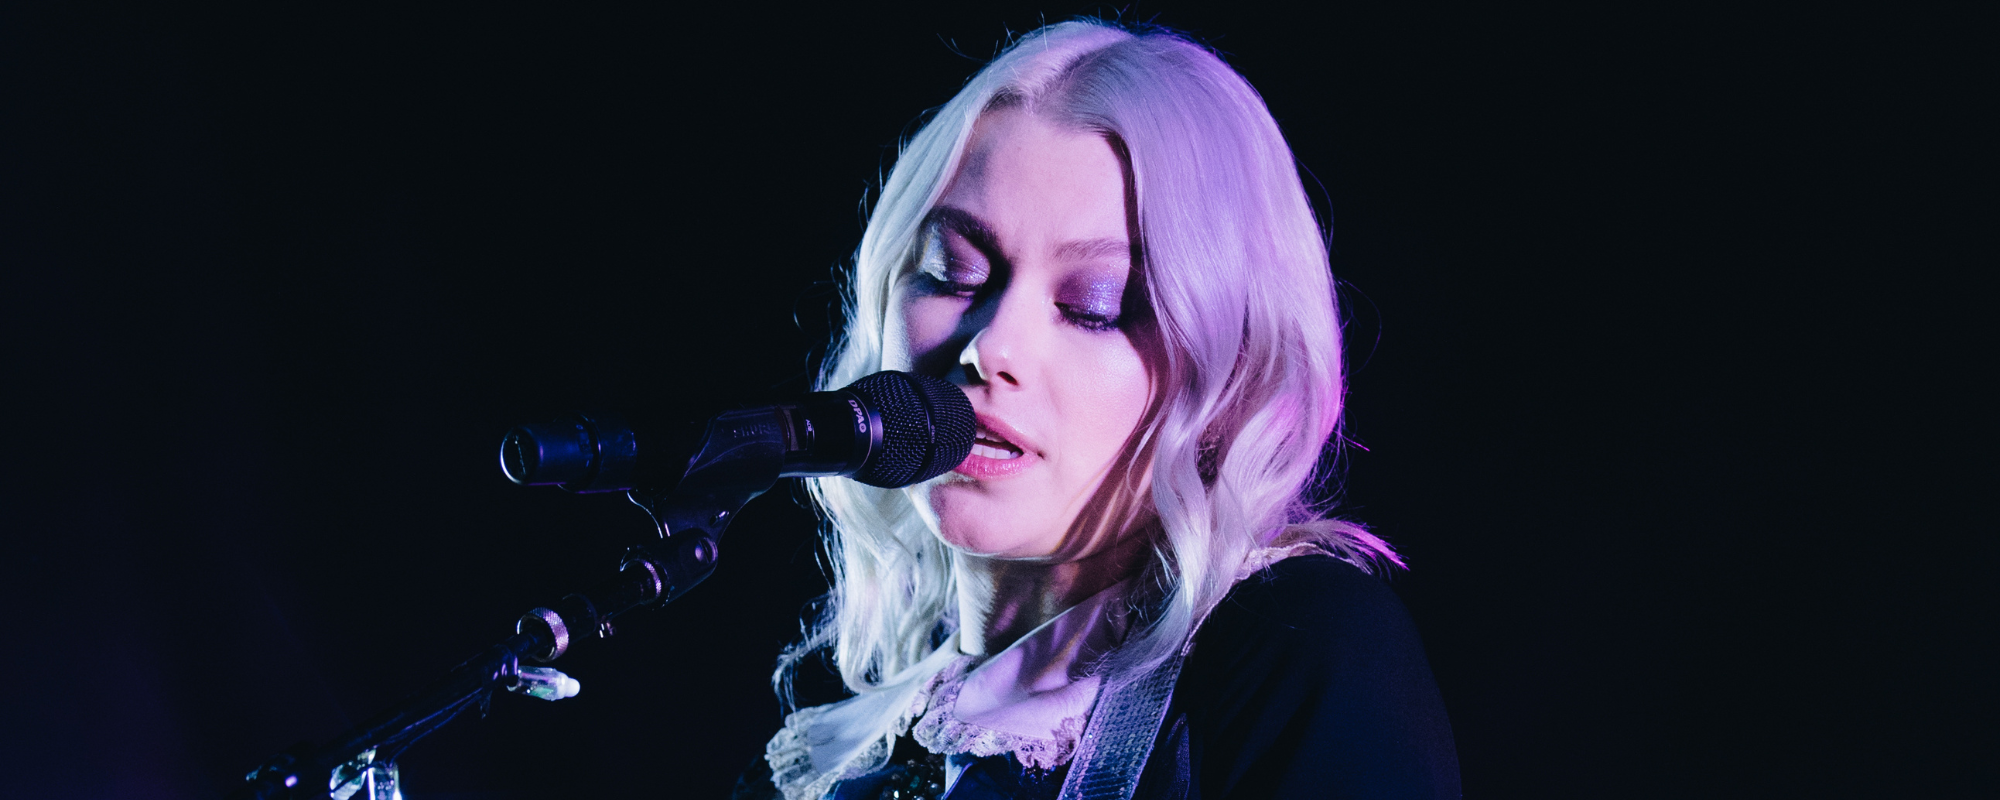 The Meaning of “Motion Sickness” by Phoebe Bridgers